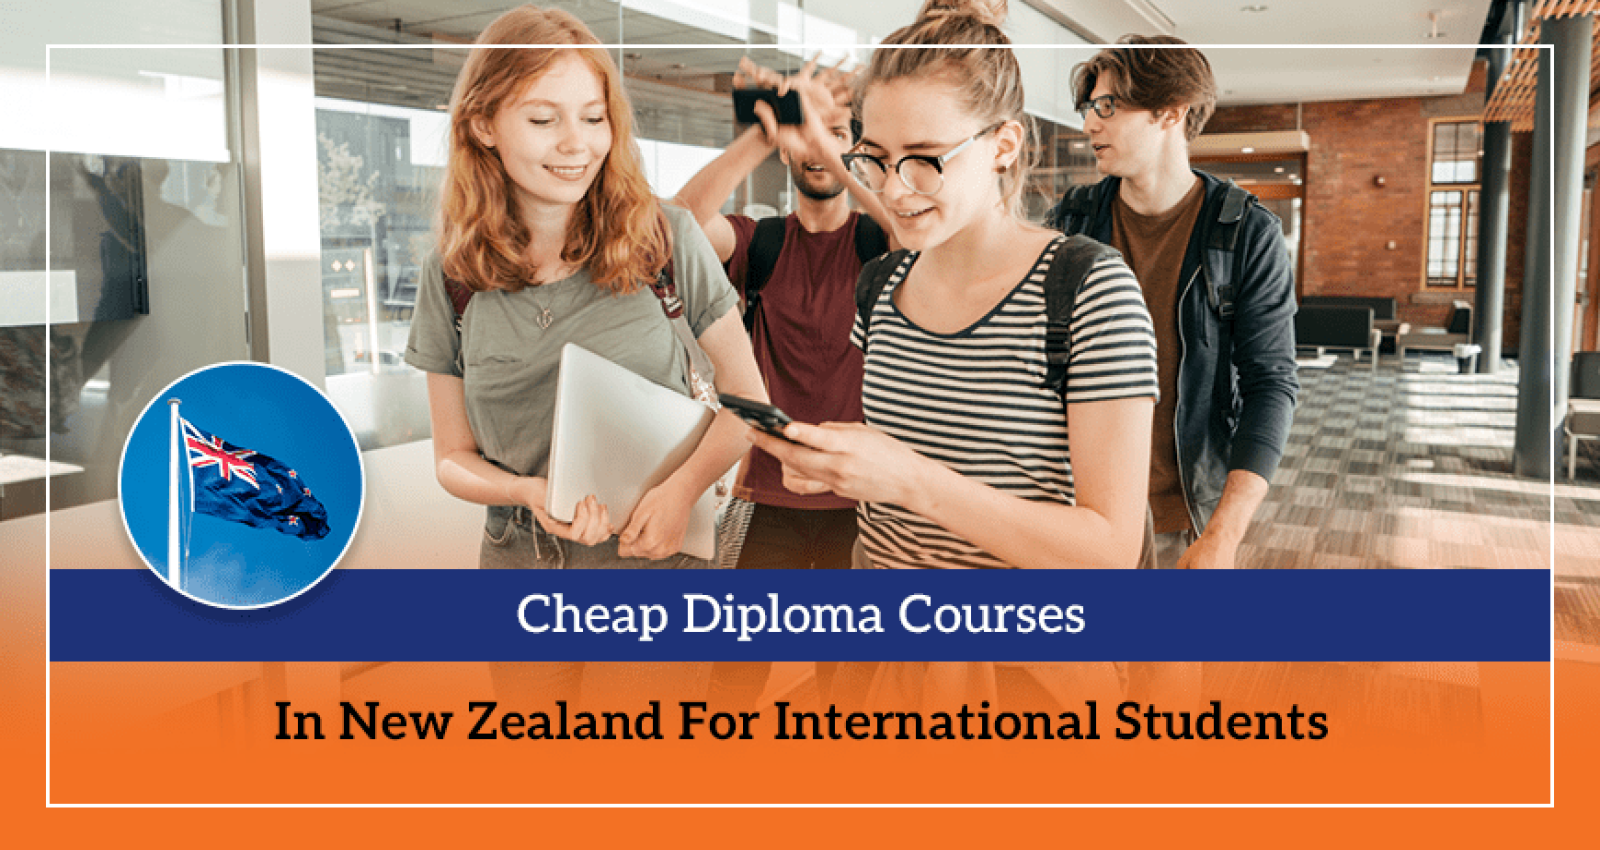 Cheap Diploma Courses In New Zealand For International Students